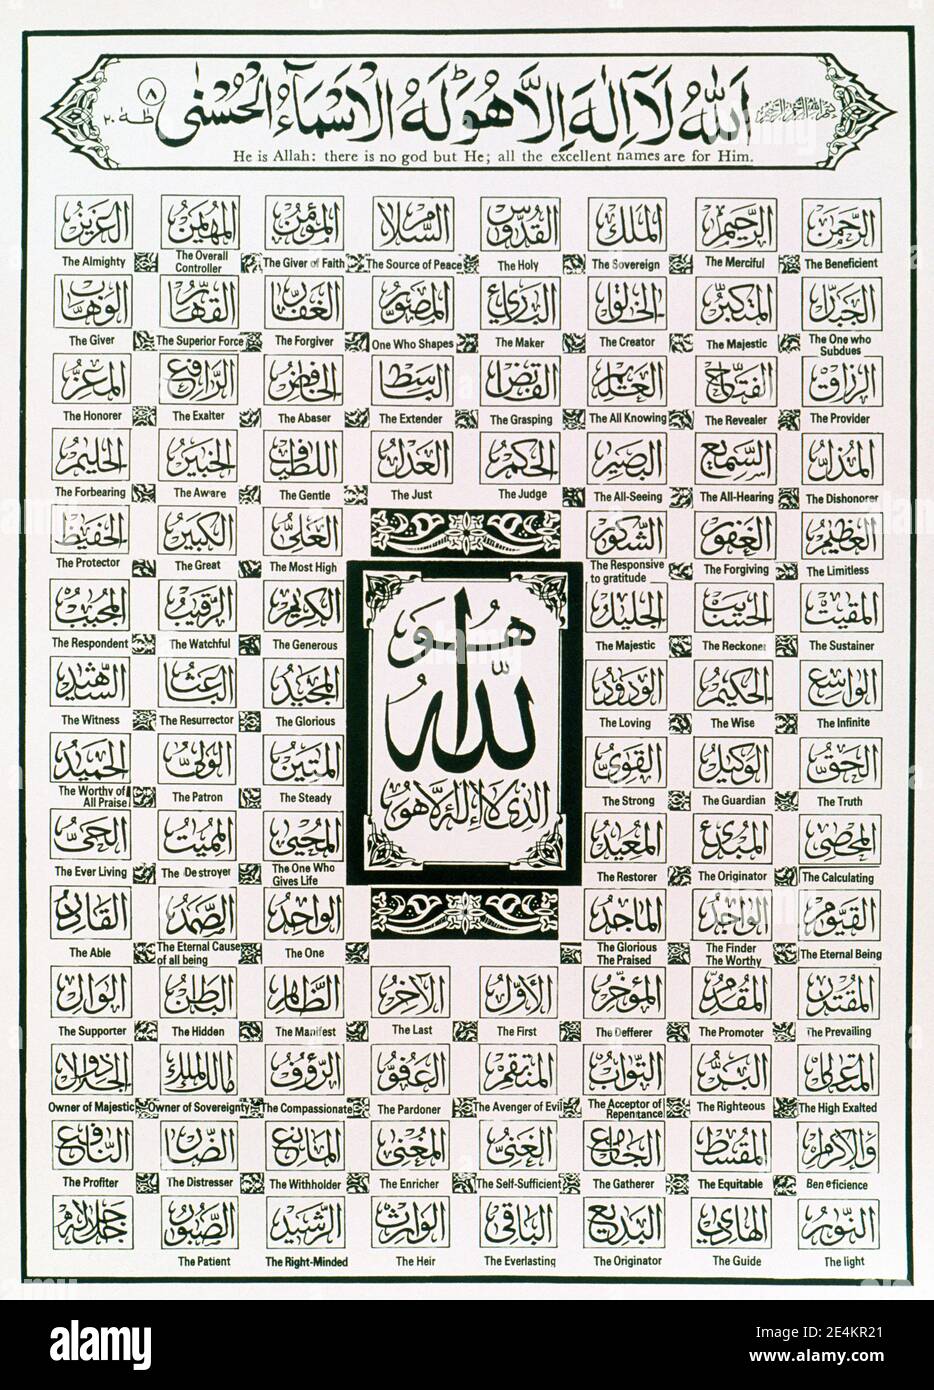 Islam 99 Names Of Allah Poster Taken In London Arabic And English ...